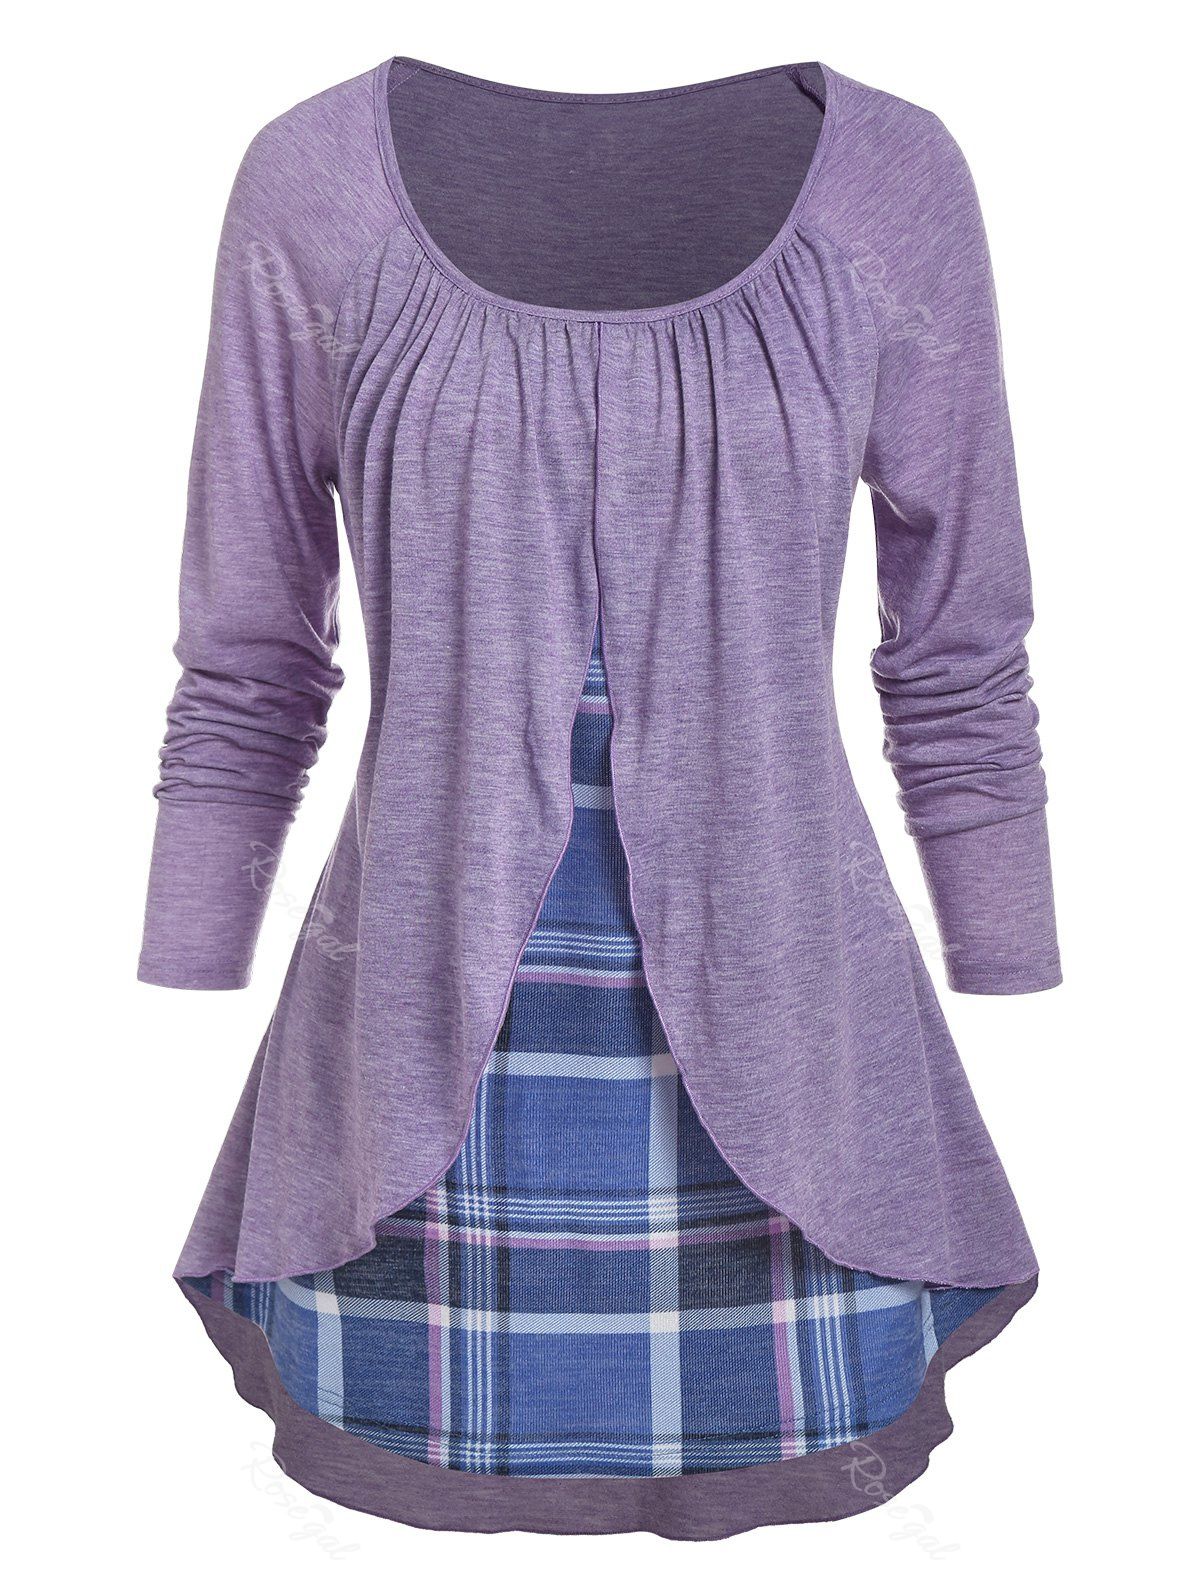 Hot Plaid Print Heathered Overlay Faux Twinset T-shirt  